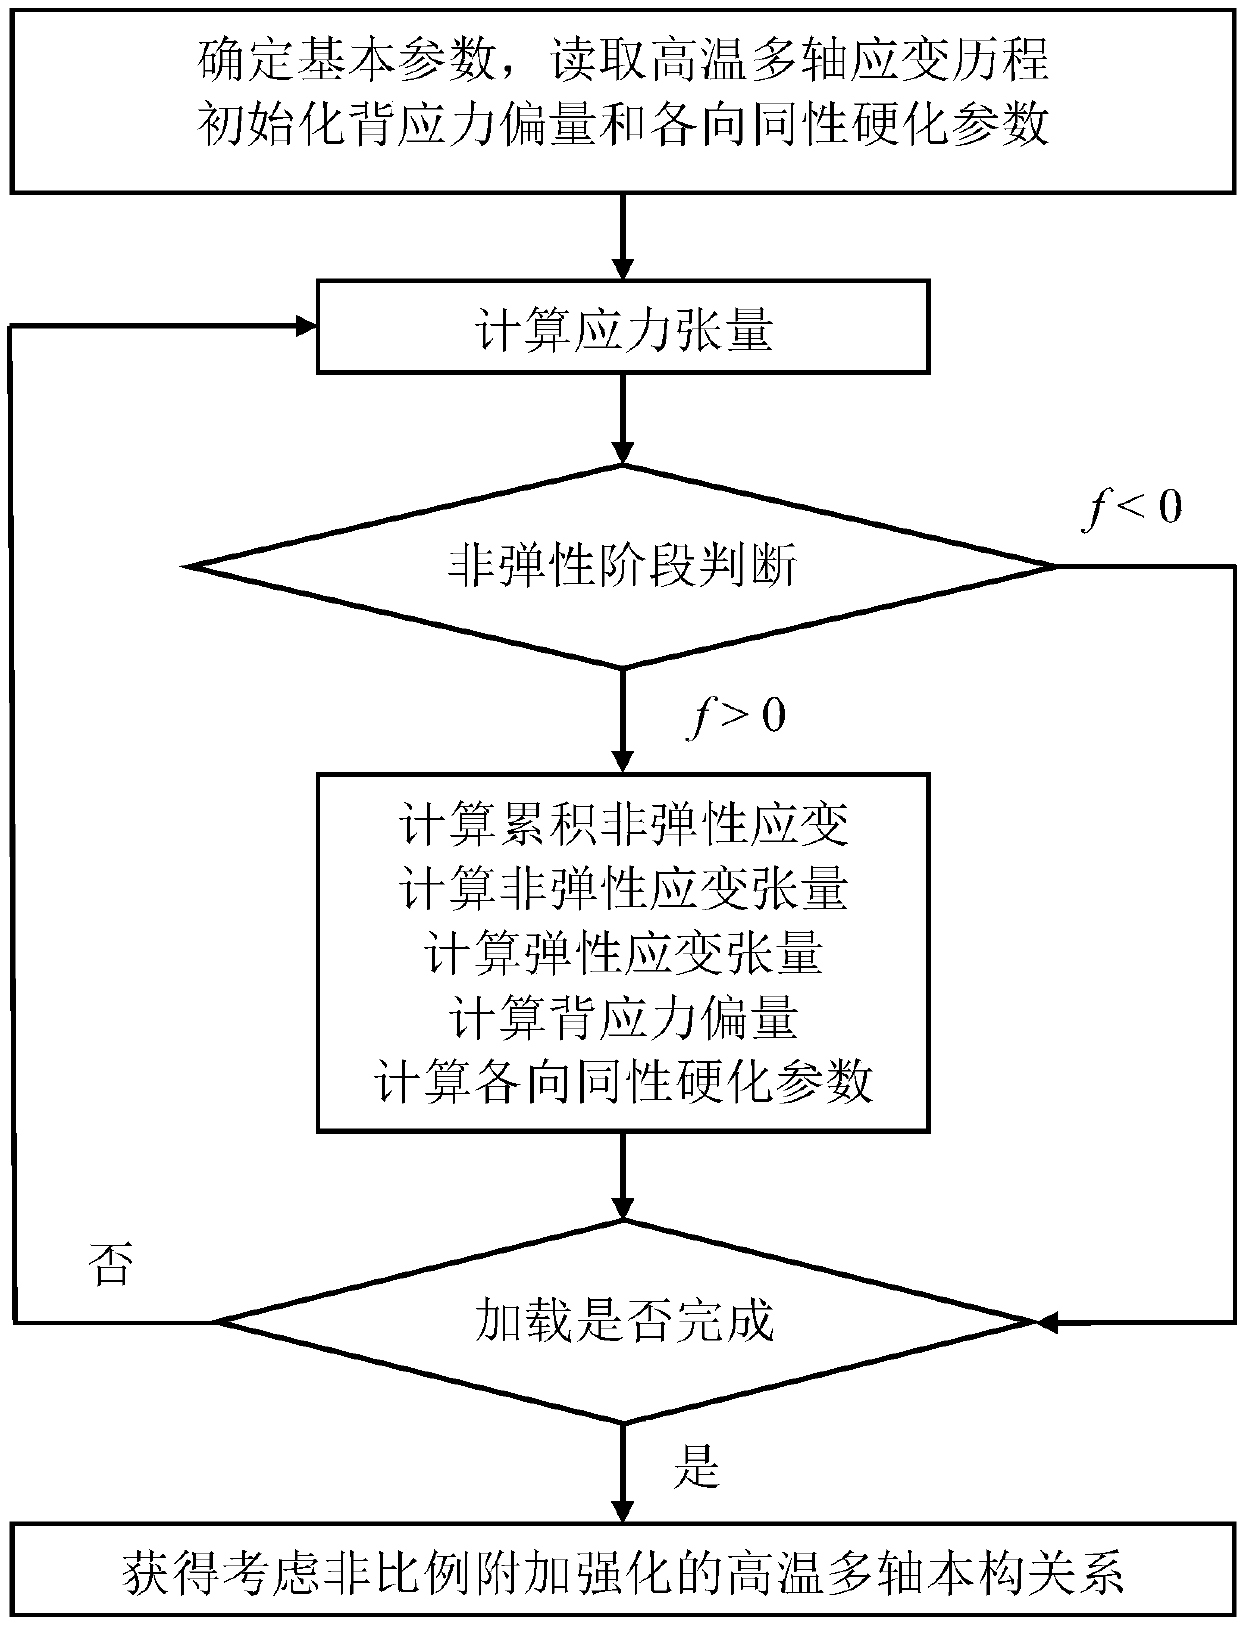 Determination method for high-temperature multi-axis constitutive relation considering non-proportional additional hardening